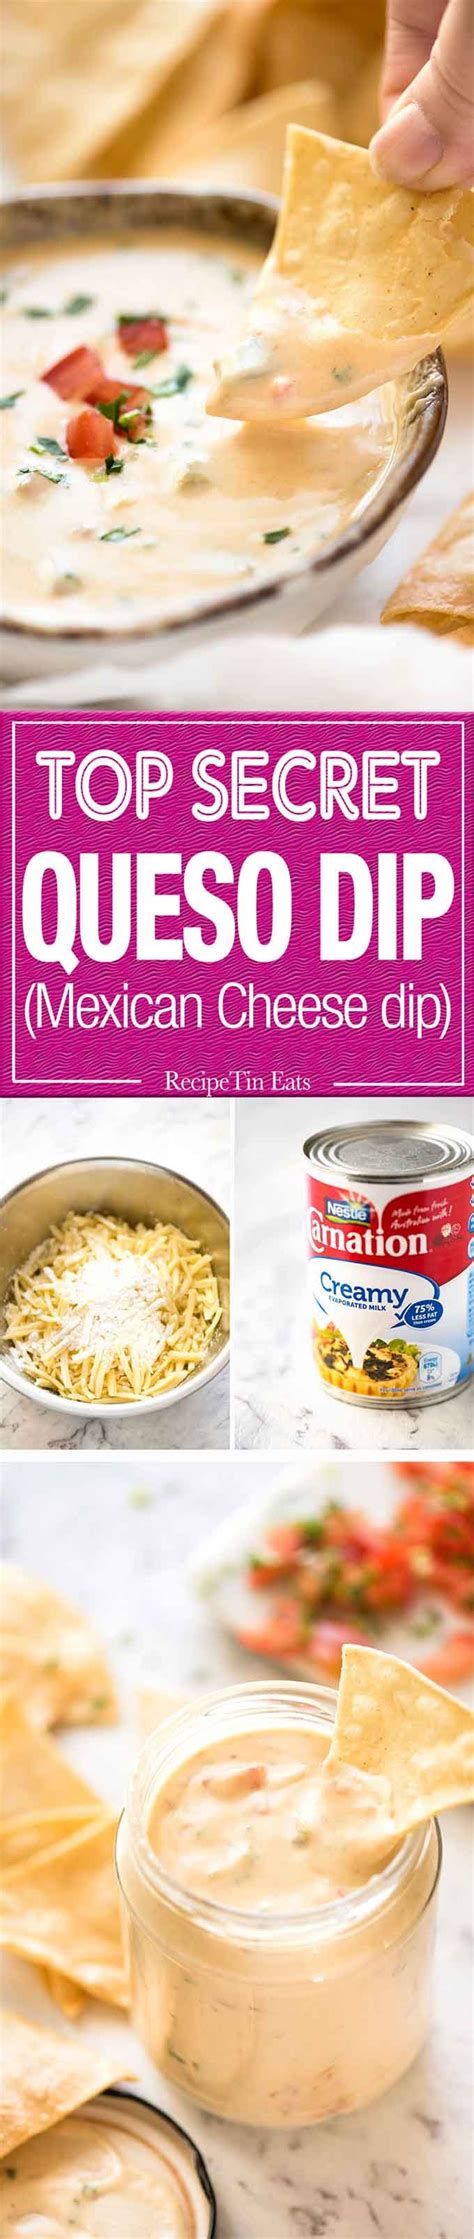 Life Changing Queso Dip Mexican Cheese Dip Recipe Recipes Food